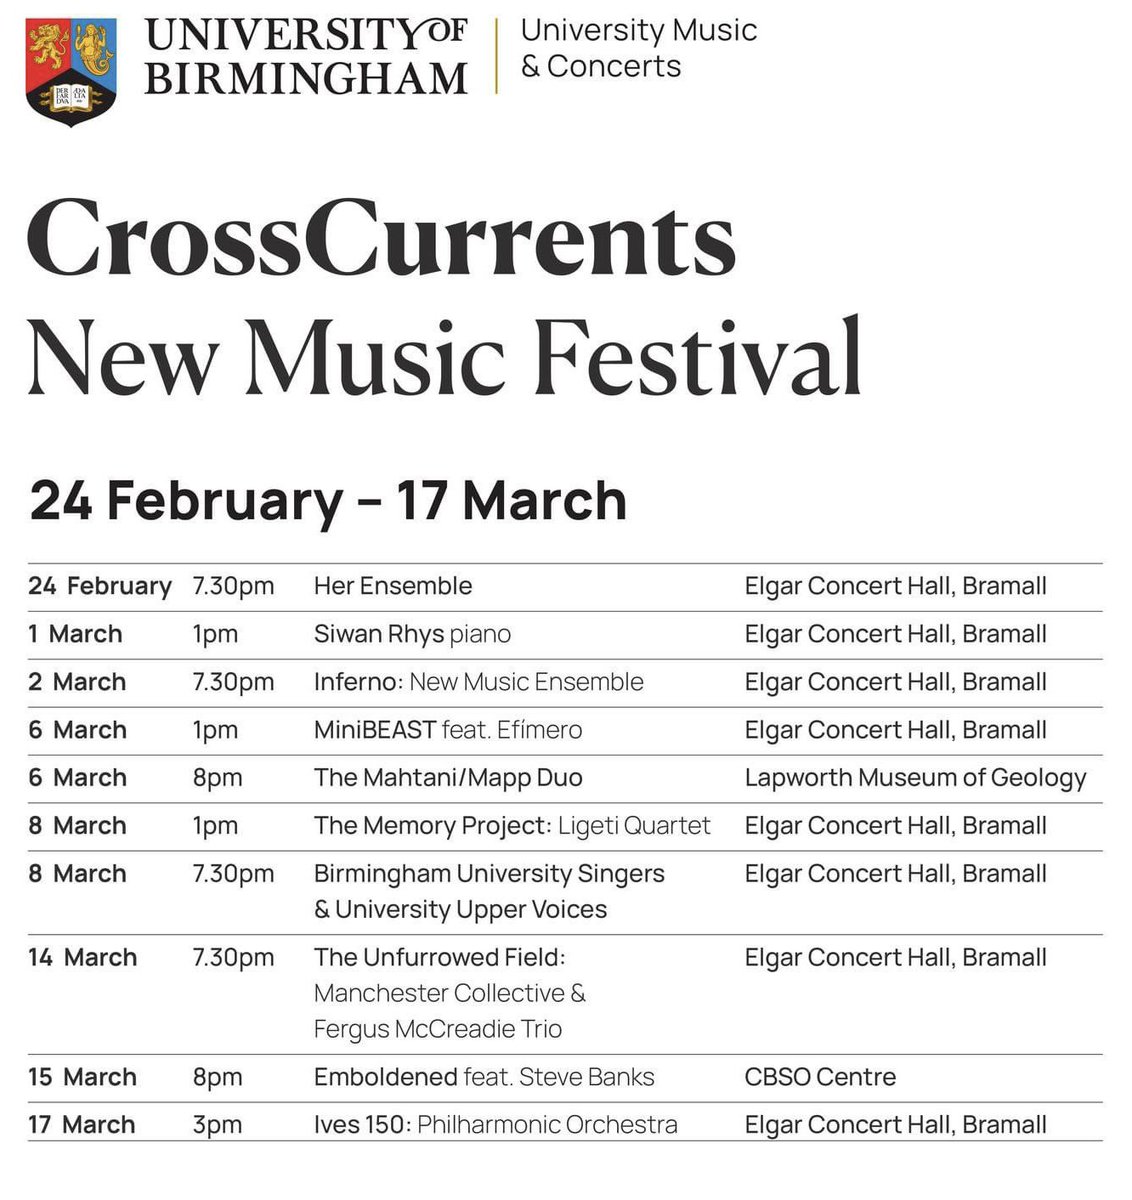 CrossCurrents Festival just around the corner and can’t wait! Kicking off with the amazing @her_ensemble (24 Feb) and @siwanrhys (1 March) with brand new commissions from @Crane1L, @bennobuto and Sasha Scott! 🤩 Get your tickets! 👉 barber.org.uk/crosscurrents2…